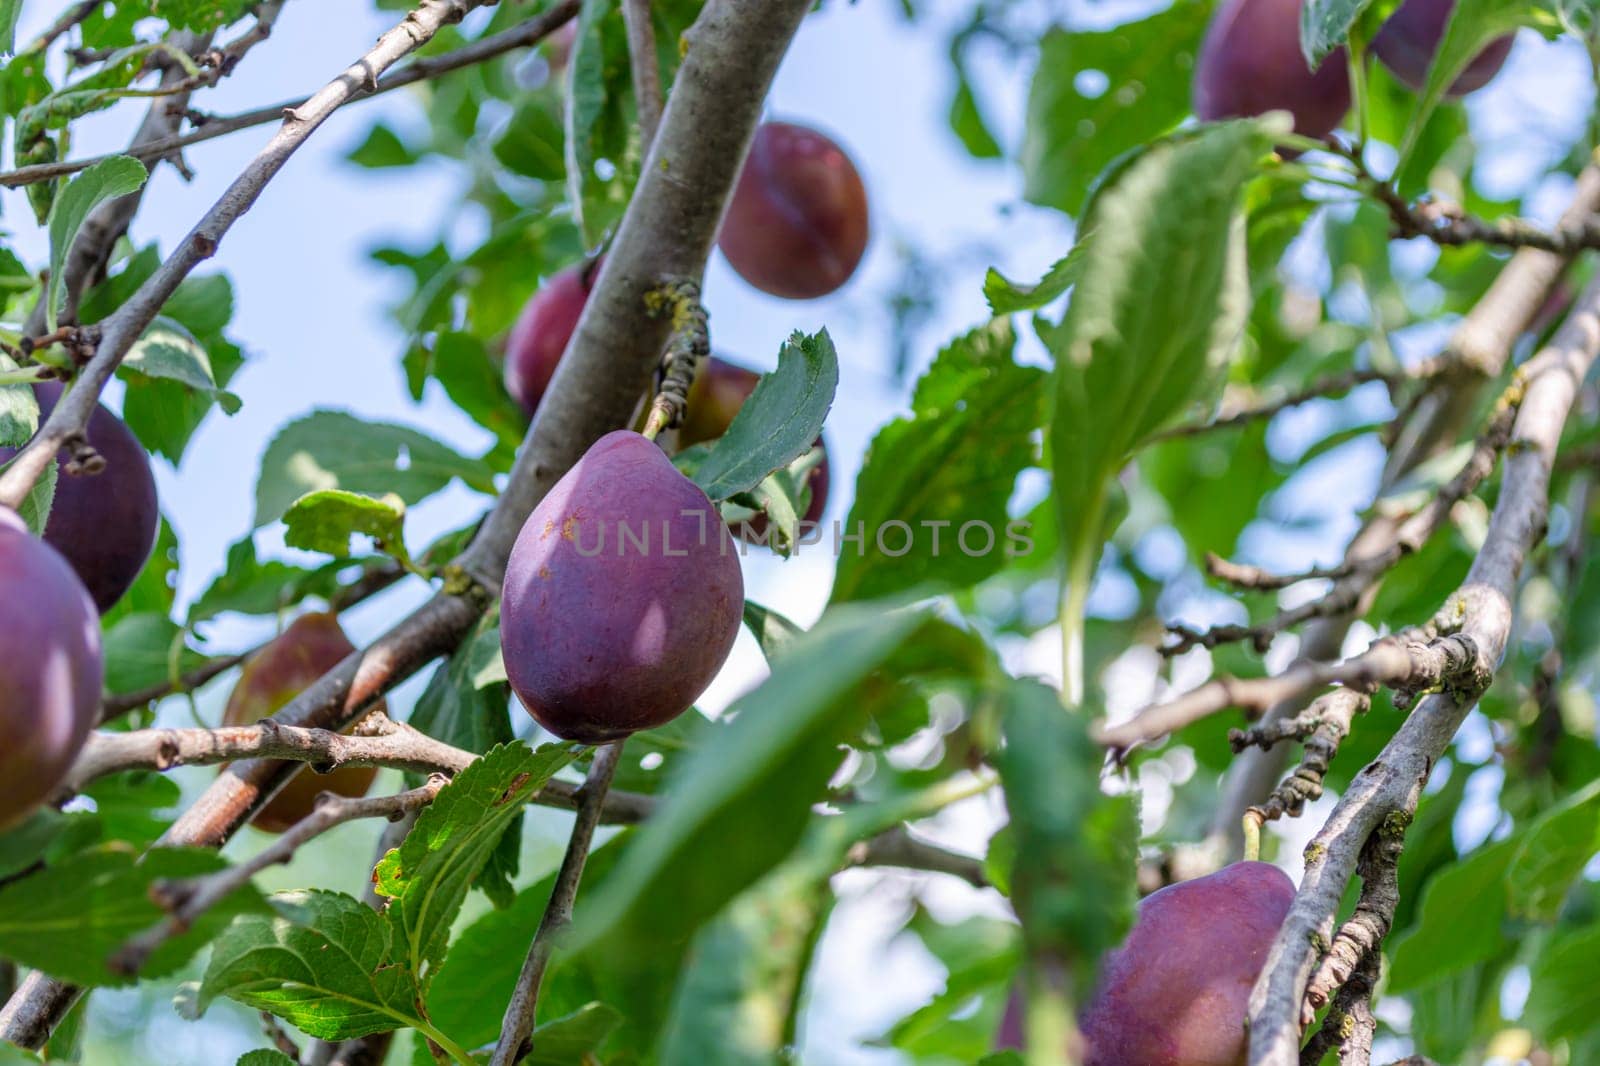 Ripe blue plums hang on branches among foliage in a summer garden against a blue sky, view from below. Harvest season. Orchard. Gardening.